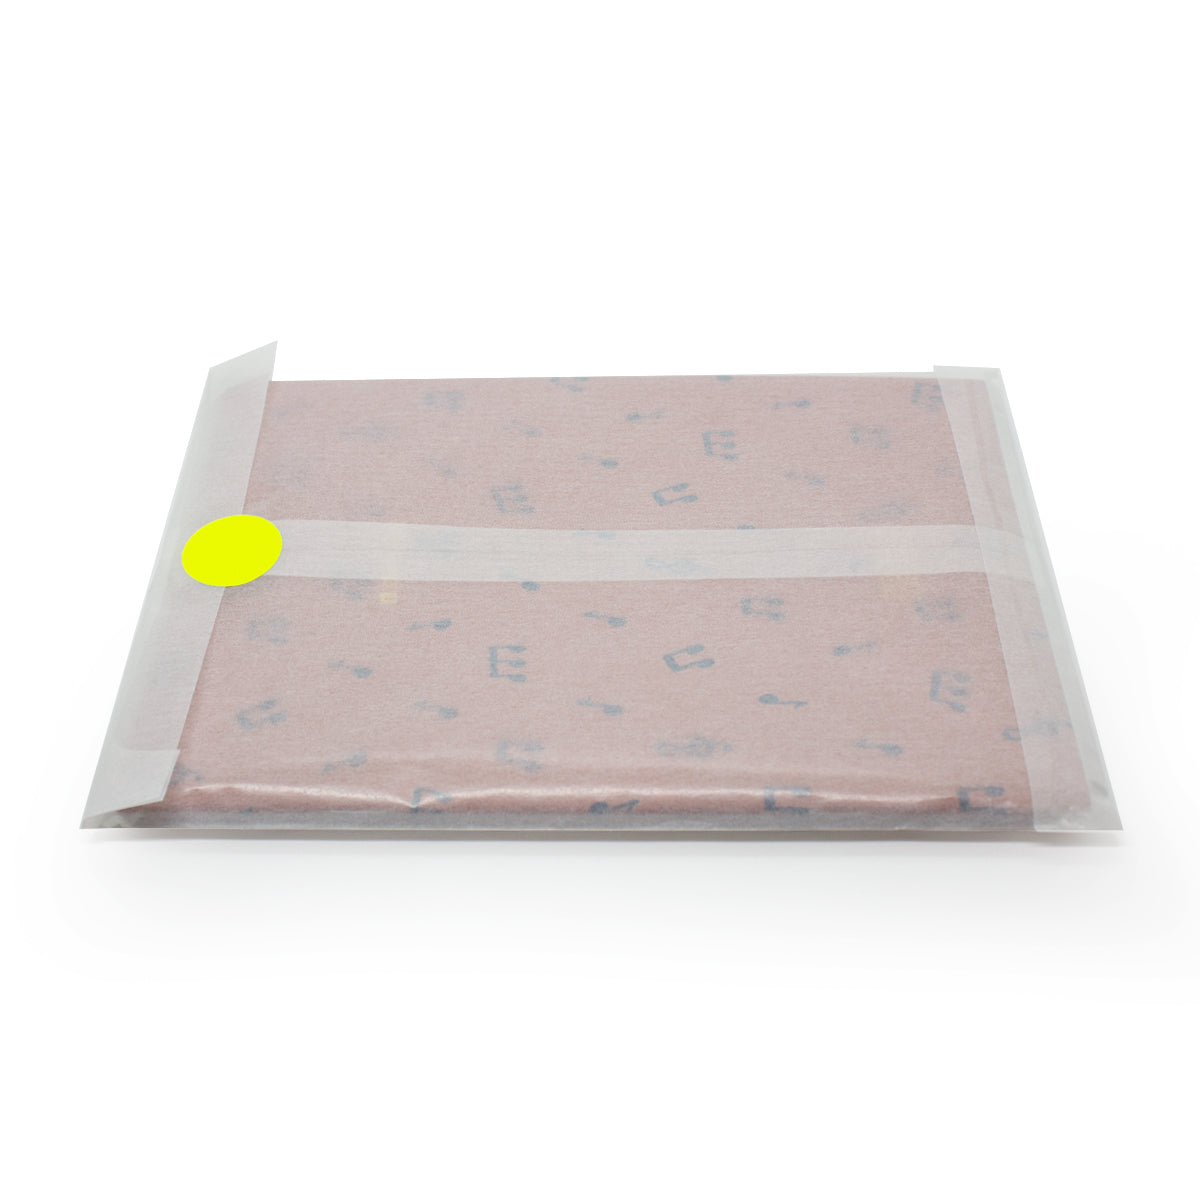 Notes Notebook Set of 2 - Dot Grid & Blank